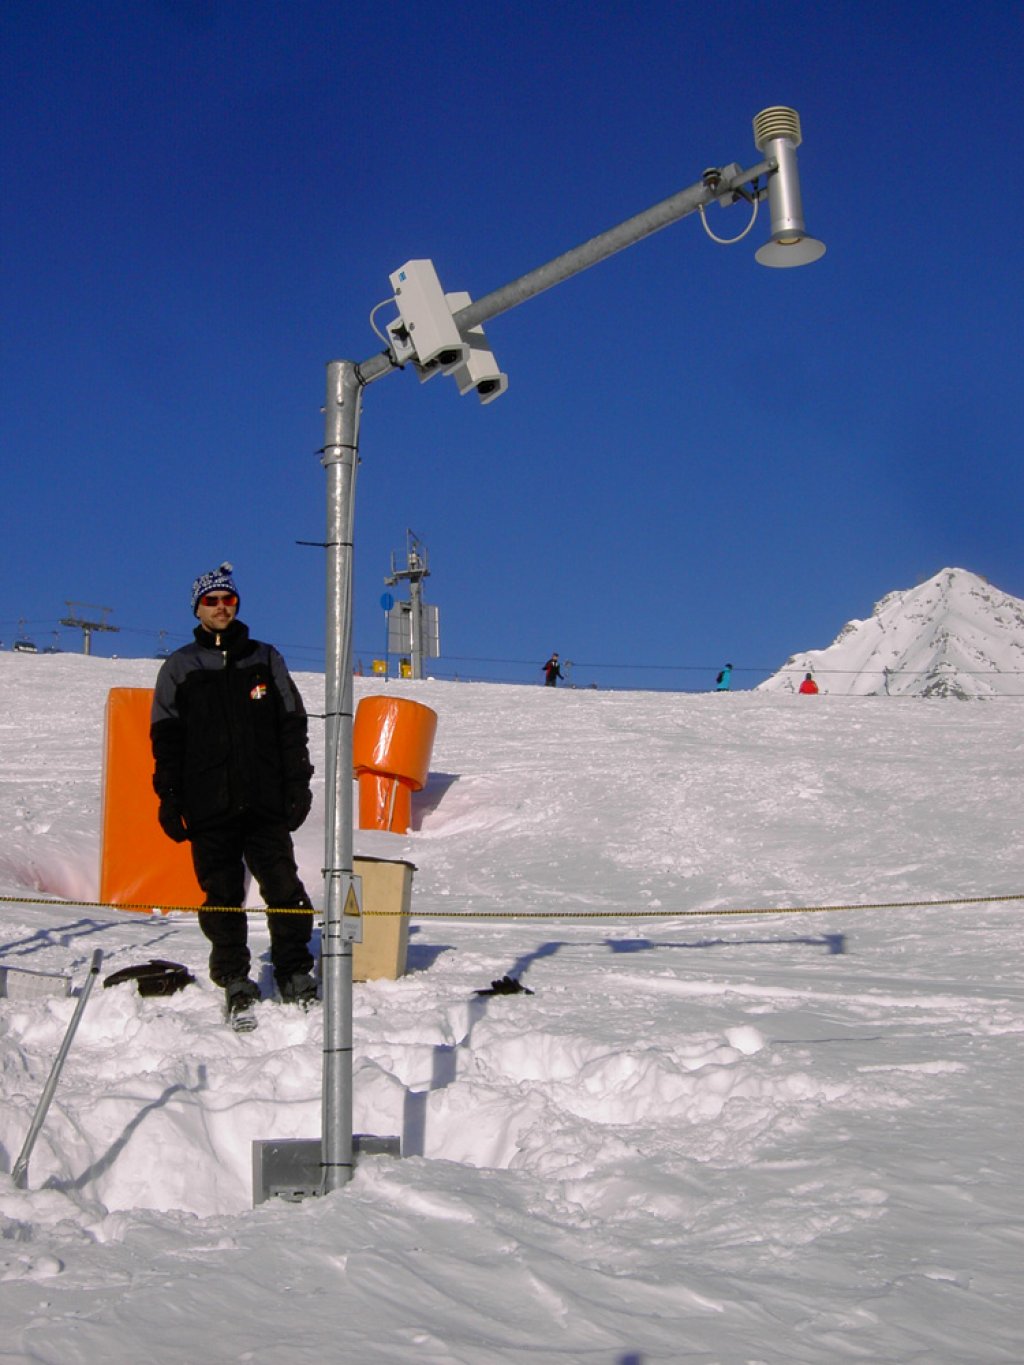 Laser/ultrasonic snow depth measurement. The sensors hang on the pole and measure the distance to the snow surface.